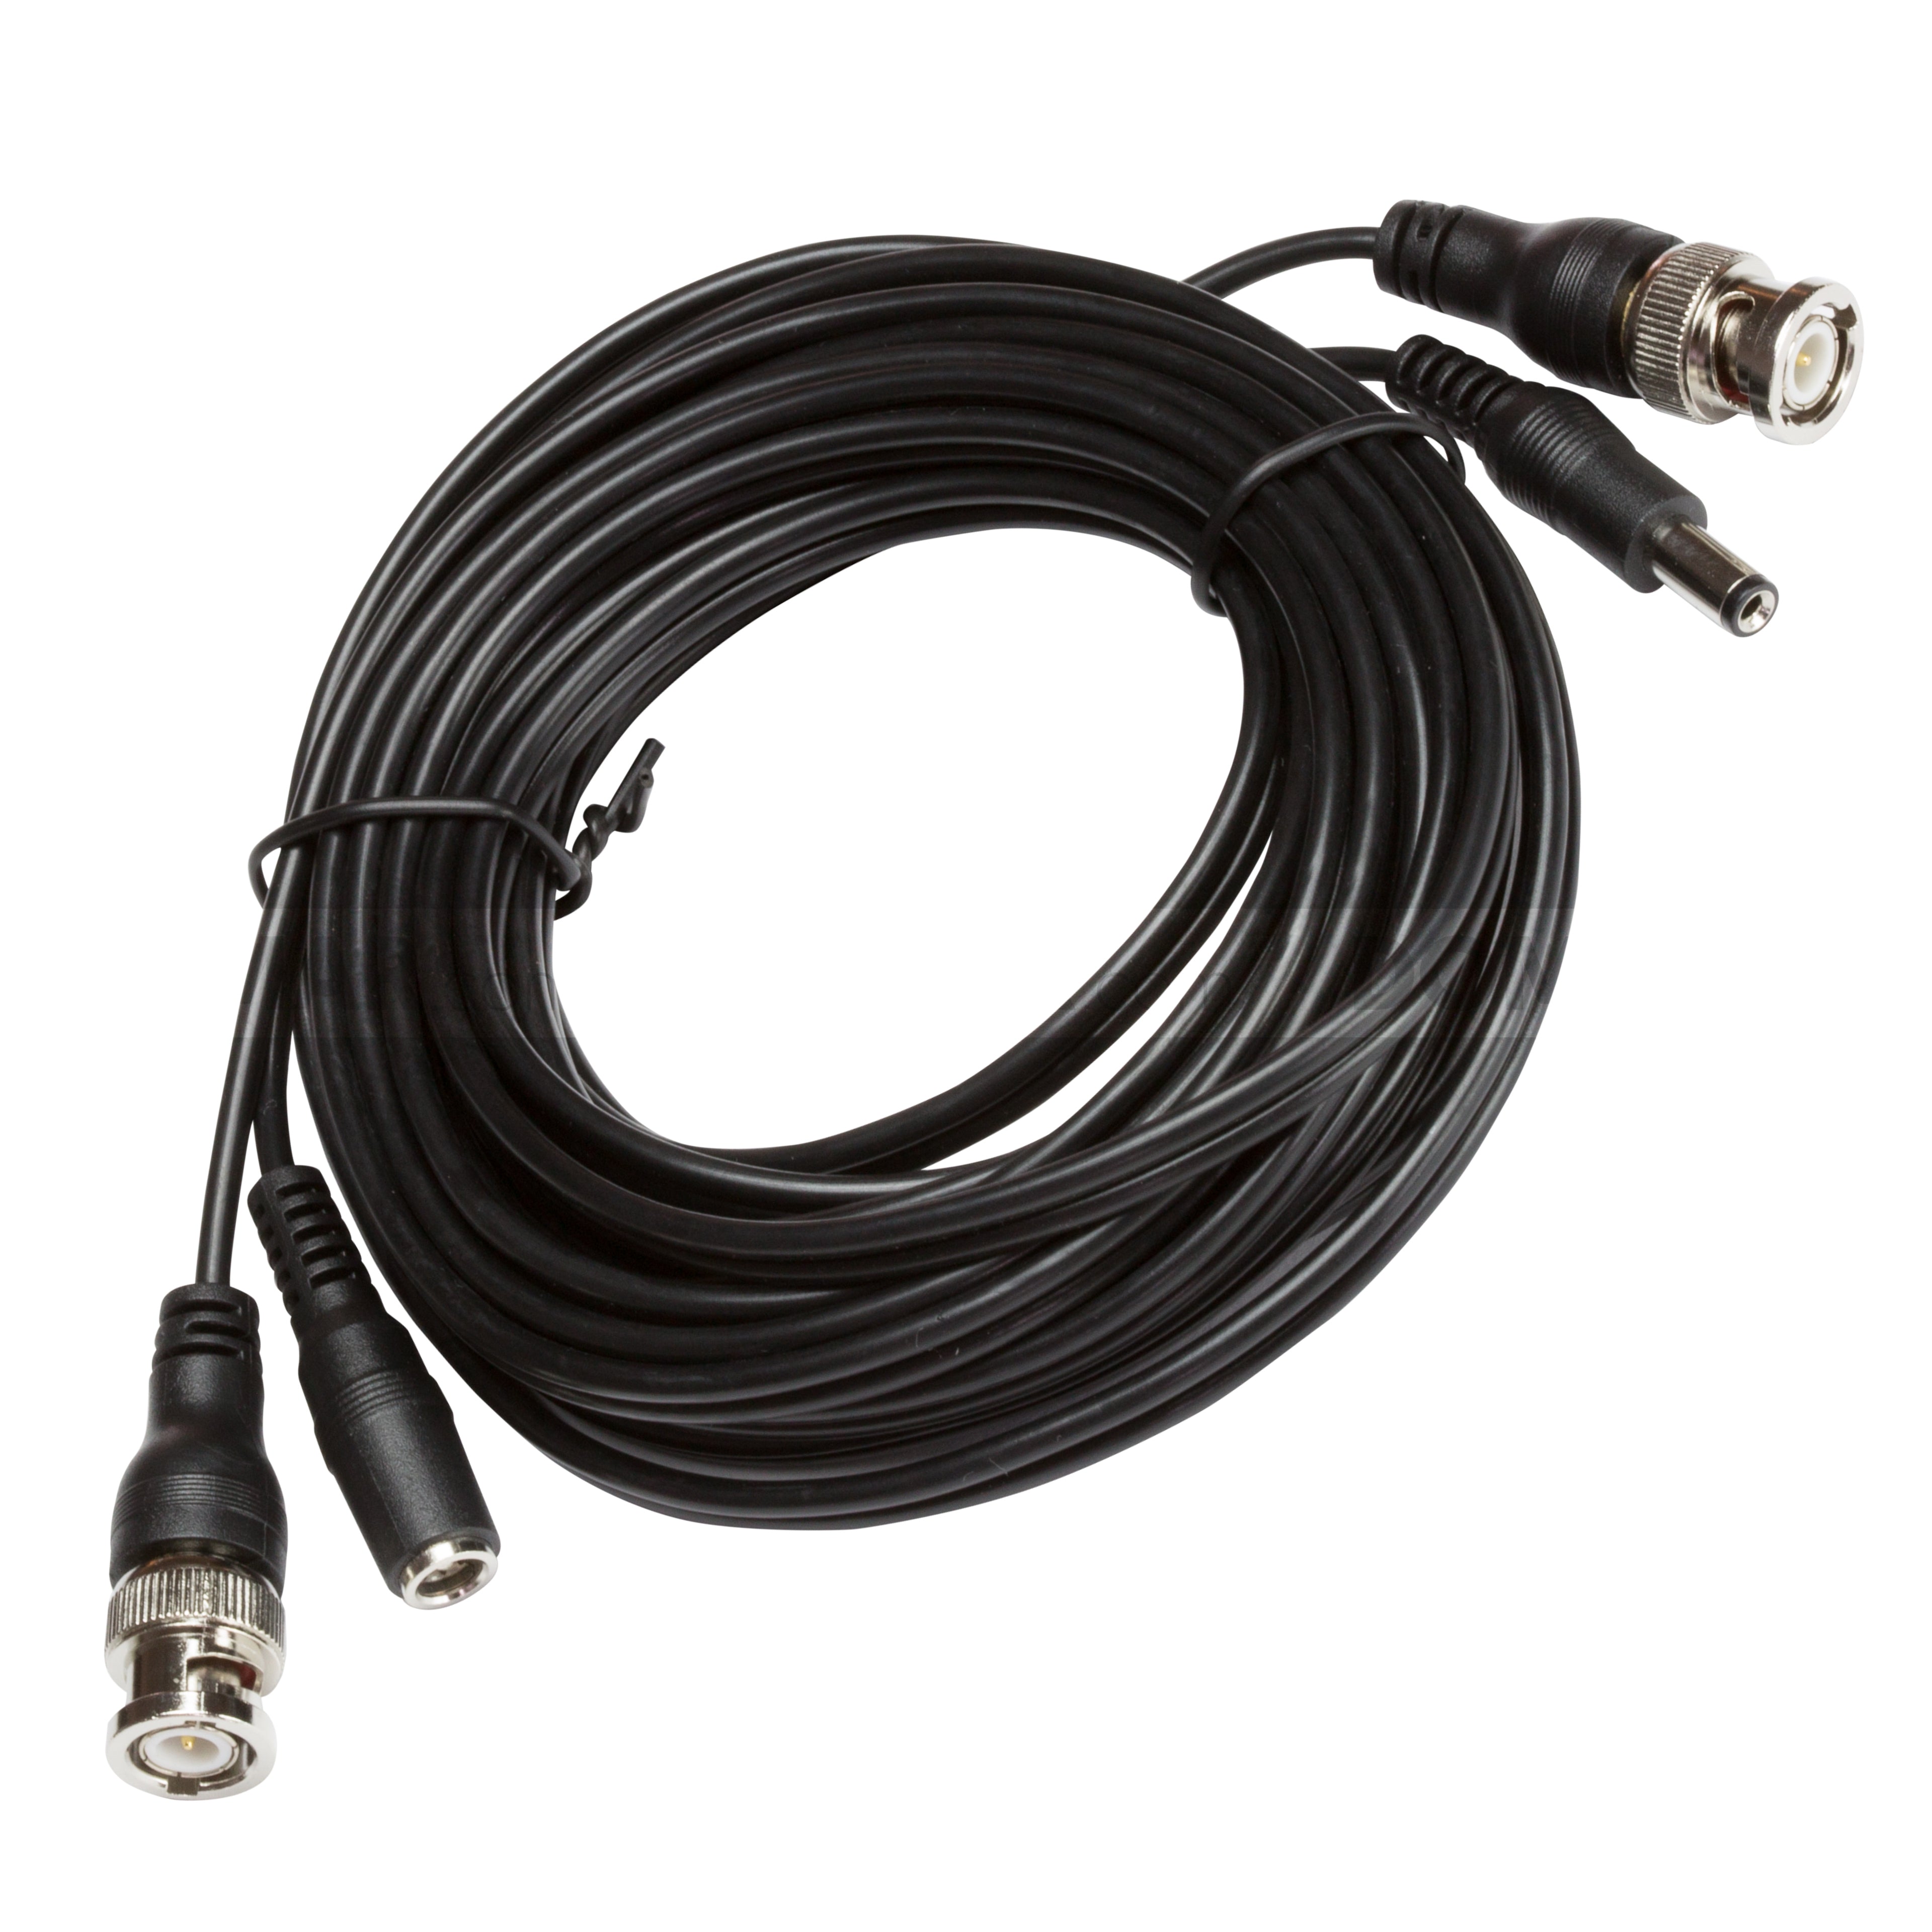 Zxtech 5M Black Pre-Made RG59 Siamese Cable